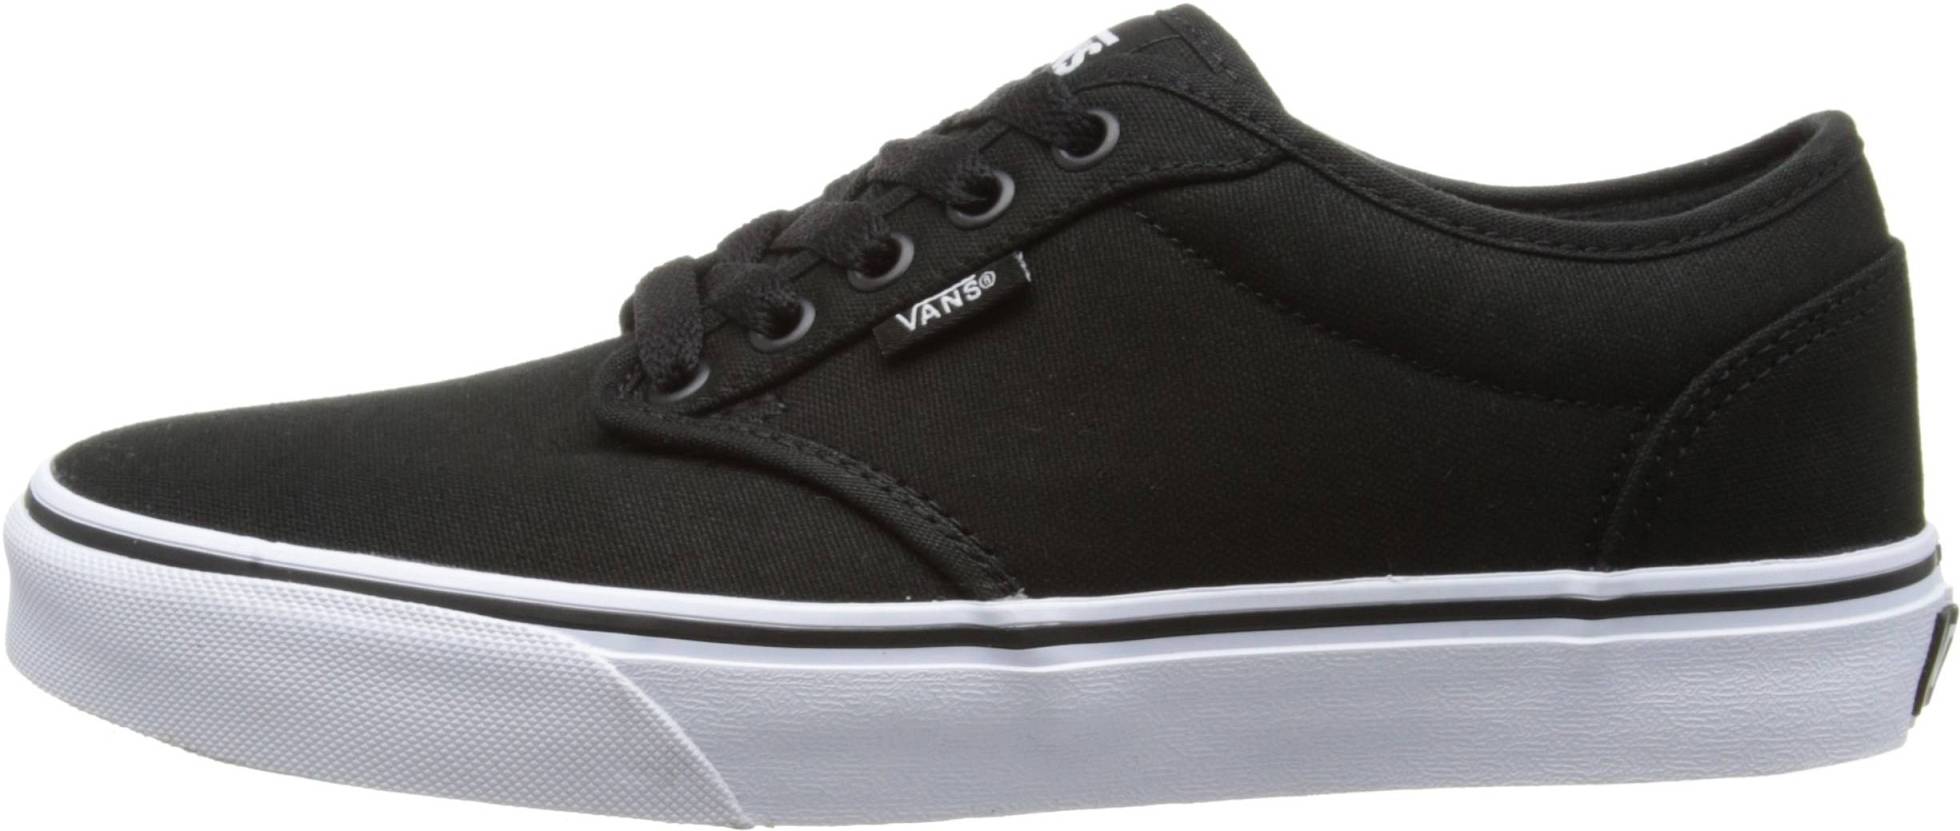 Vans Atwood – Shoes Reviews & Reasons To Buy